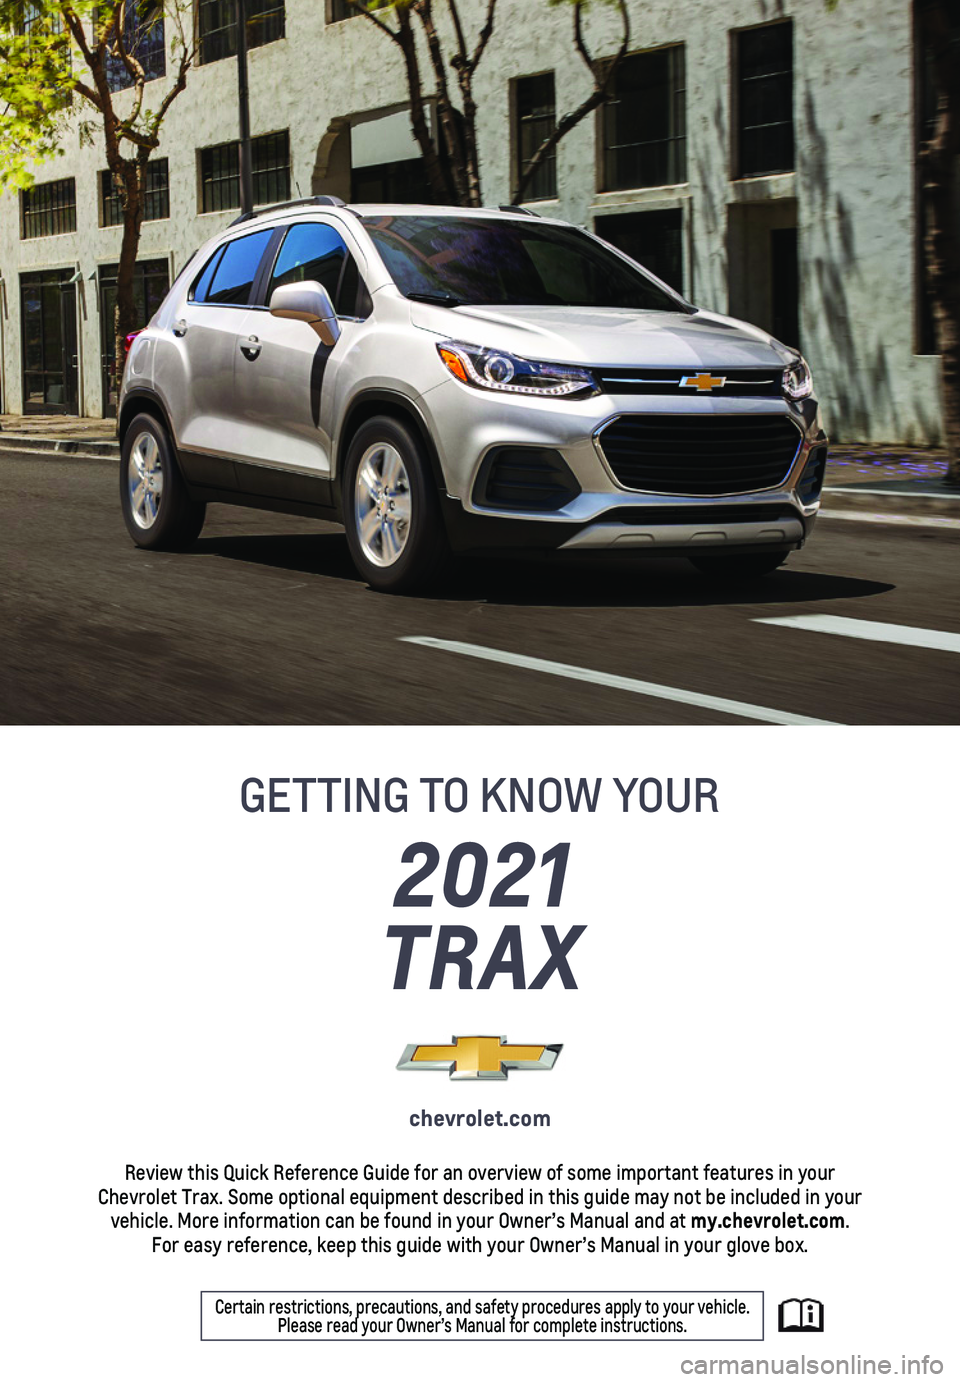 CHEVROLET TRAX 2021  Get To Know Guide 1
2021 
TRAX
GETTING TO KNOW YOUR
chevrolet.com
Review this Quick Reference Guide for an overview of some important feat\
ures in your  Chevrolet Trax. Some optional equipment described in this guide 